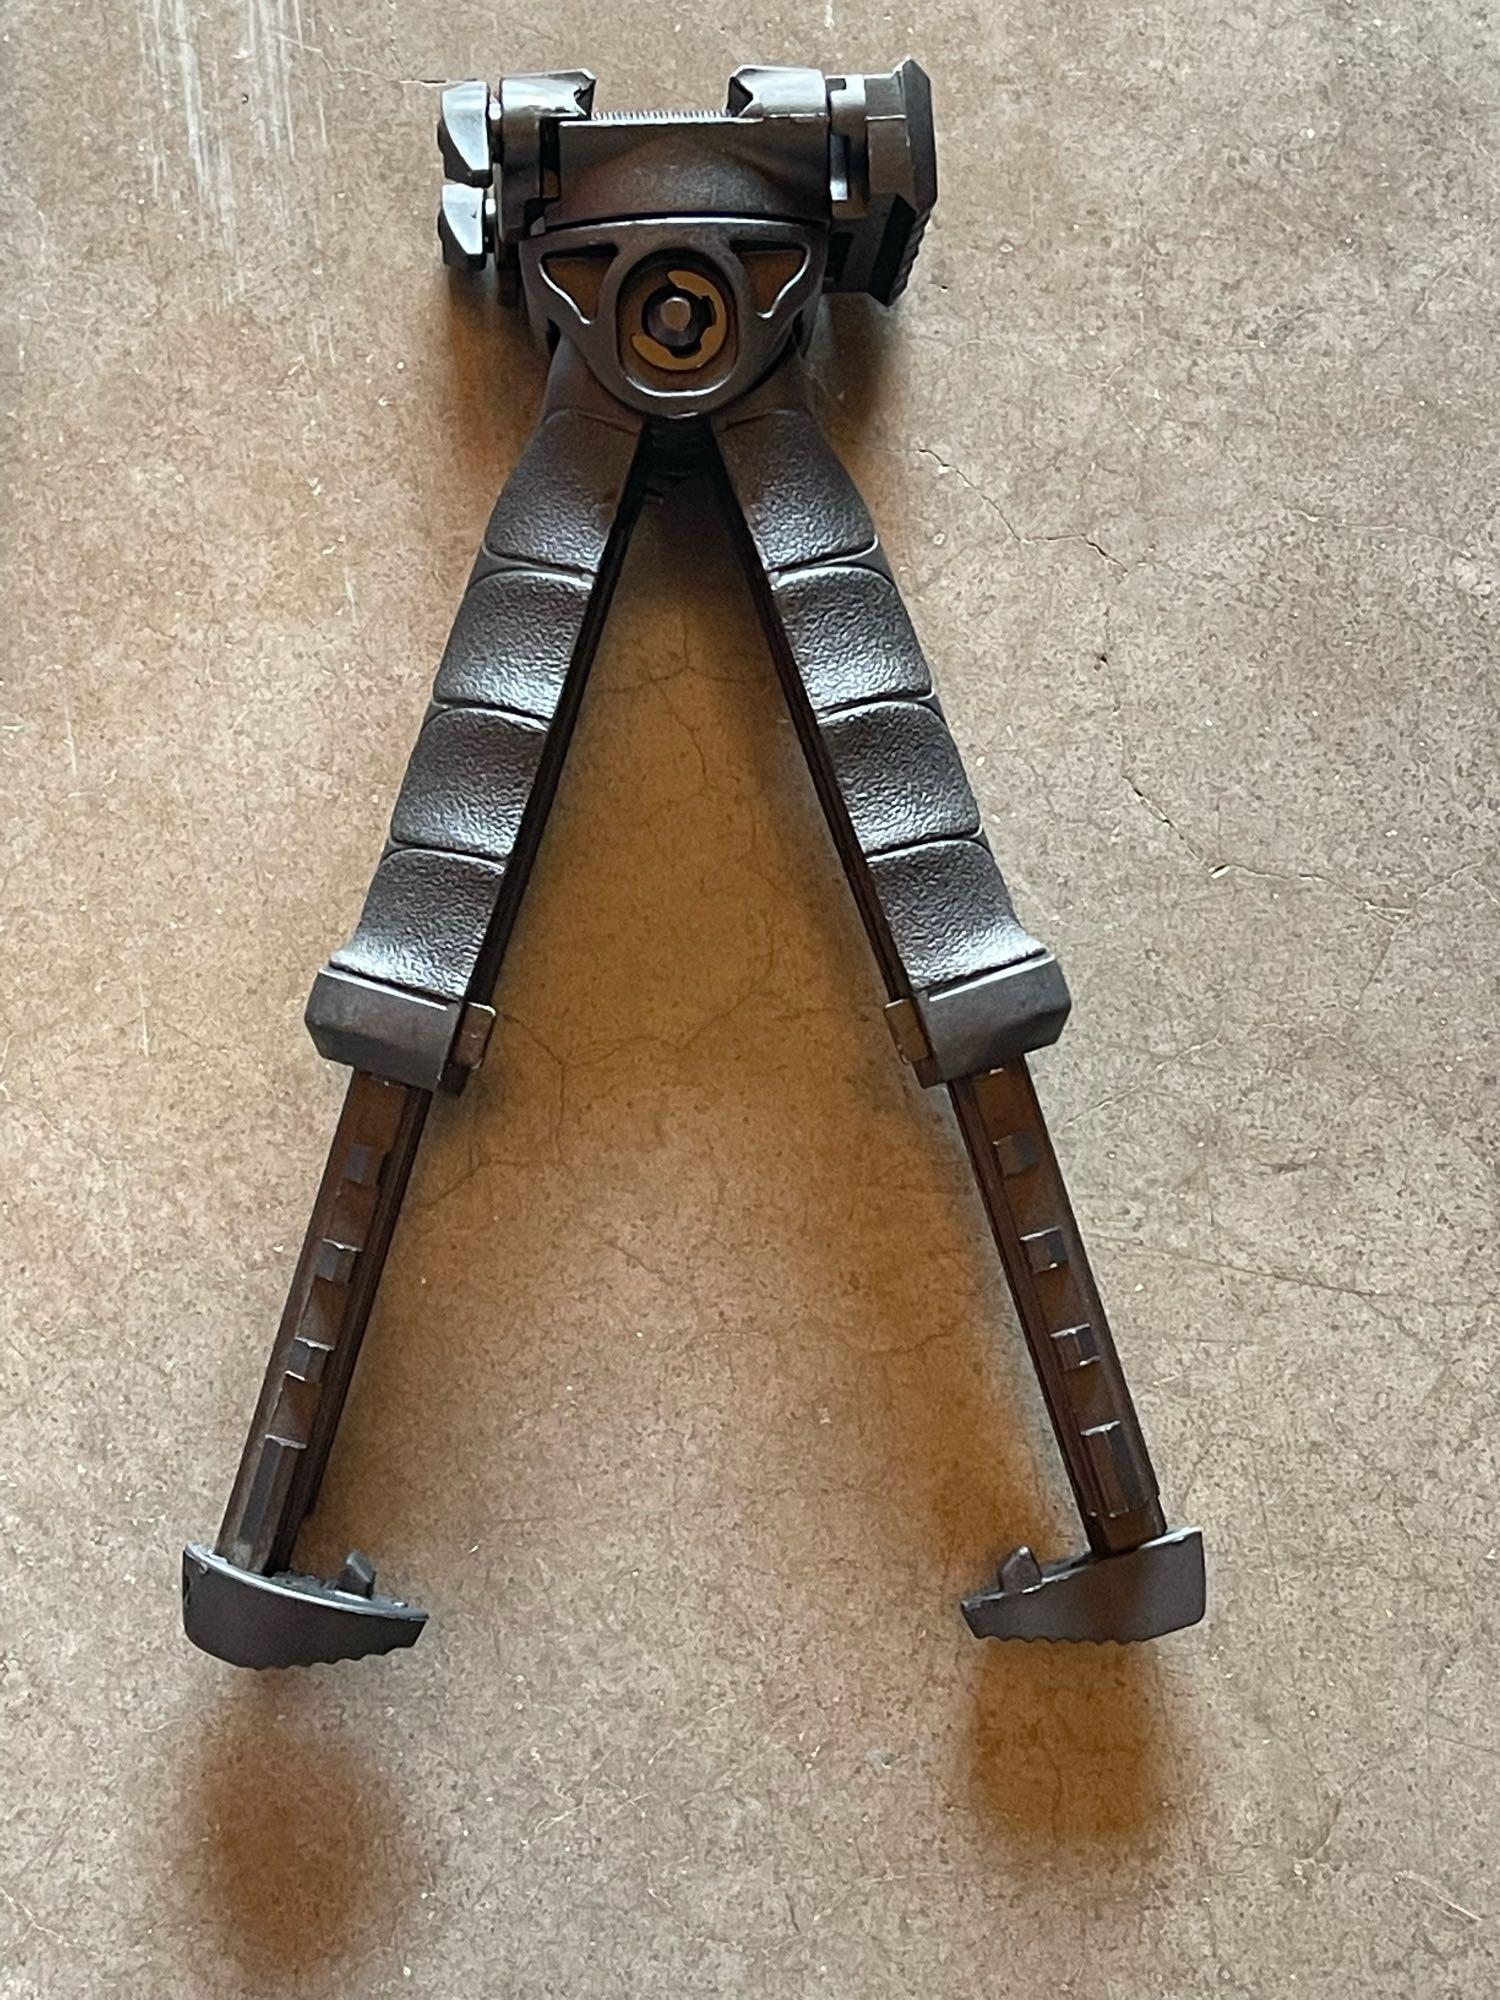 Bipod Grip with Picatinny Rail, Height Adjustable - BRAND NEW, $64.99 MSRP